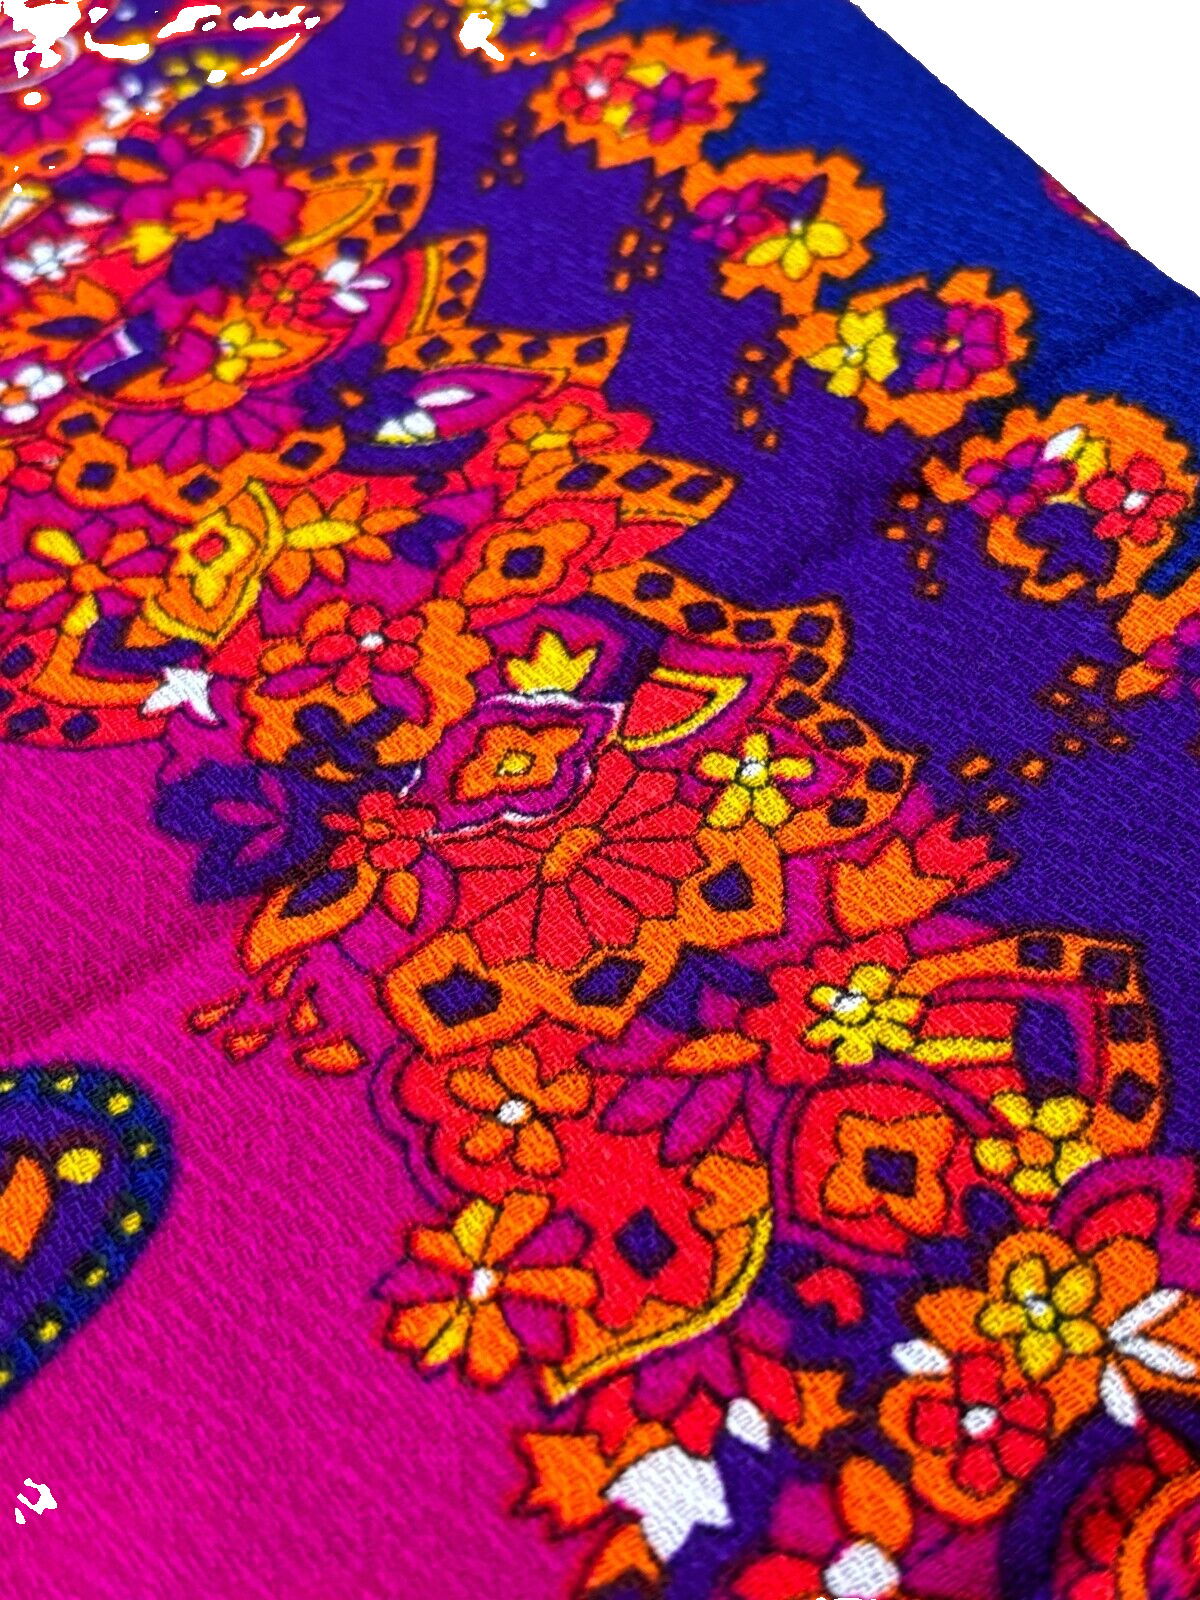 Vintage Fabric Remnant 60s 70s Mid Century Psychedelic Floral Flower Power 82x44